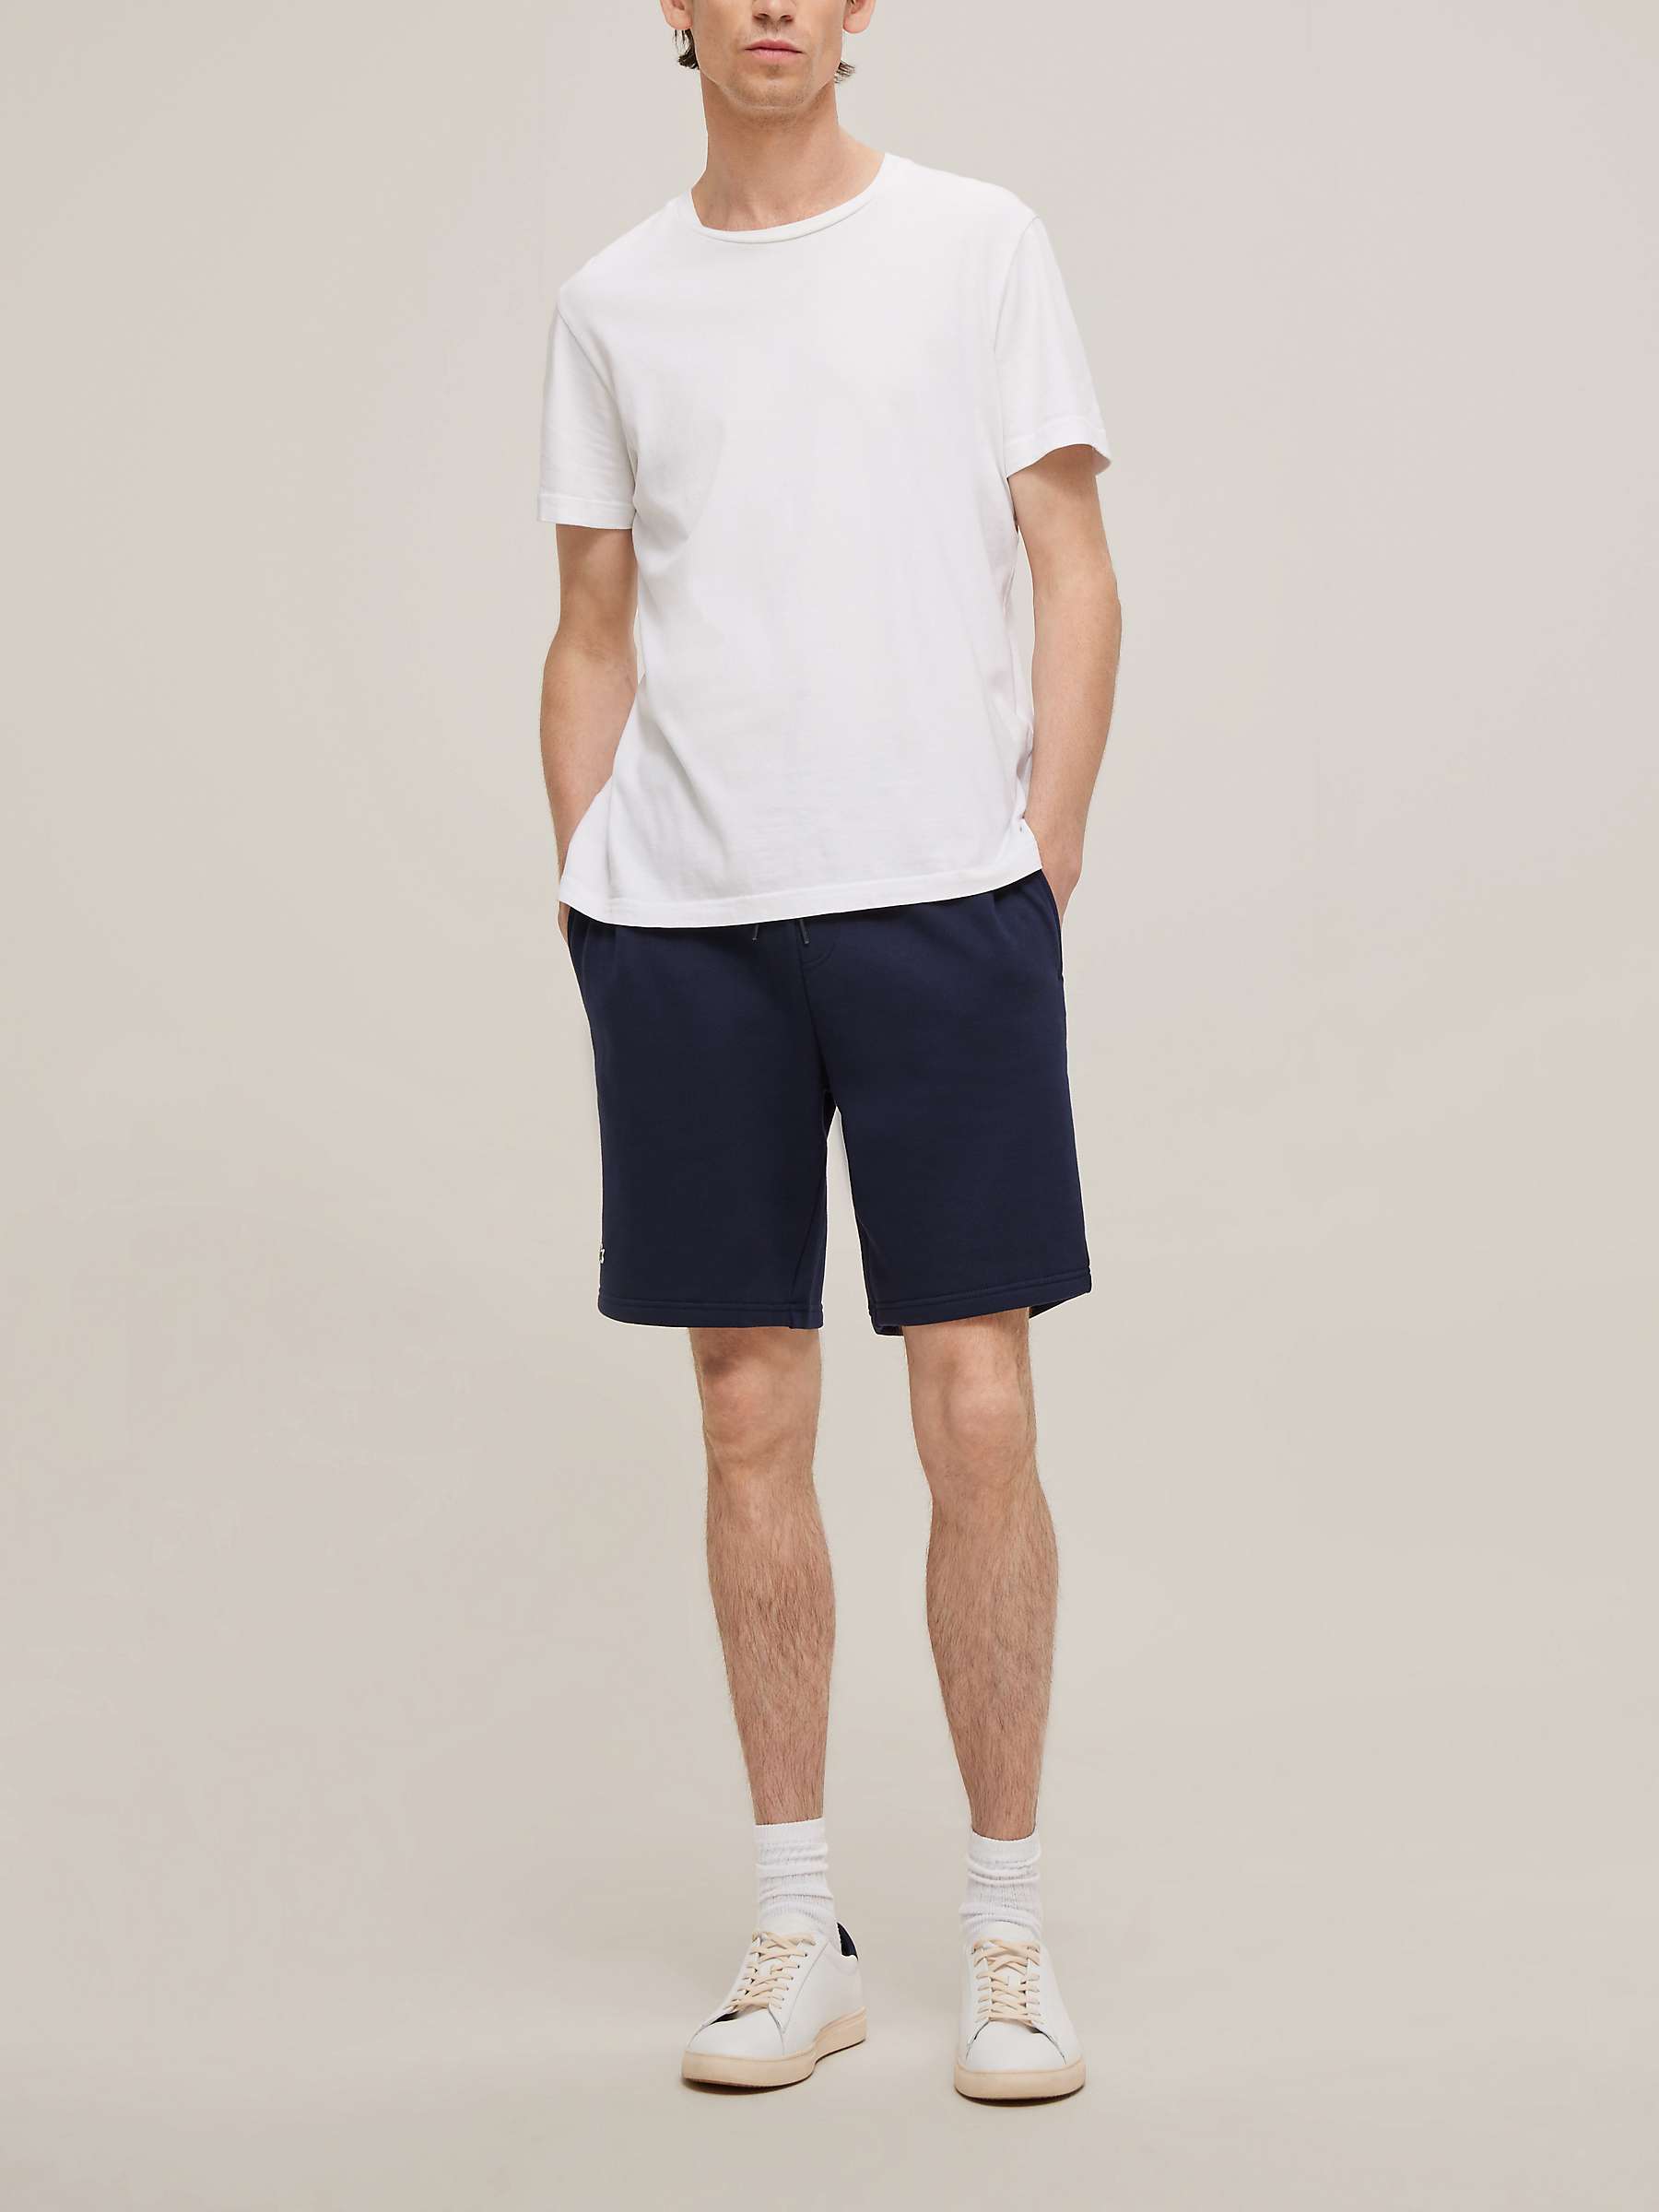 Buy Lacoste Classic Logo Jogger Sweat Shorts Online at johnlewis.com